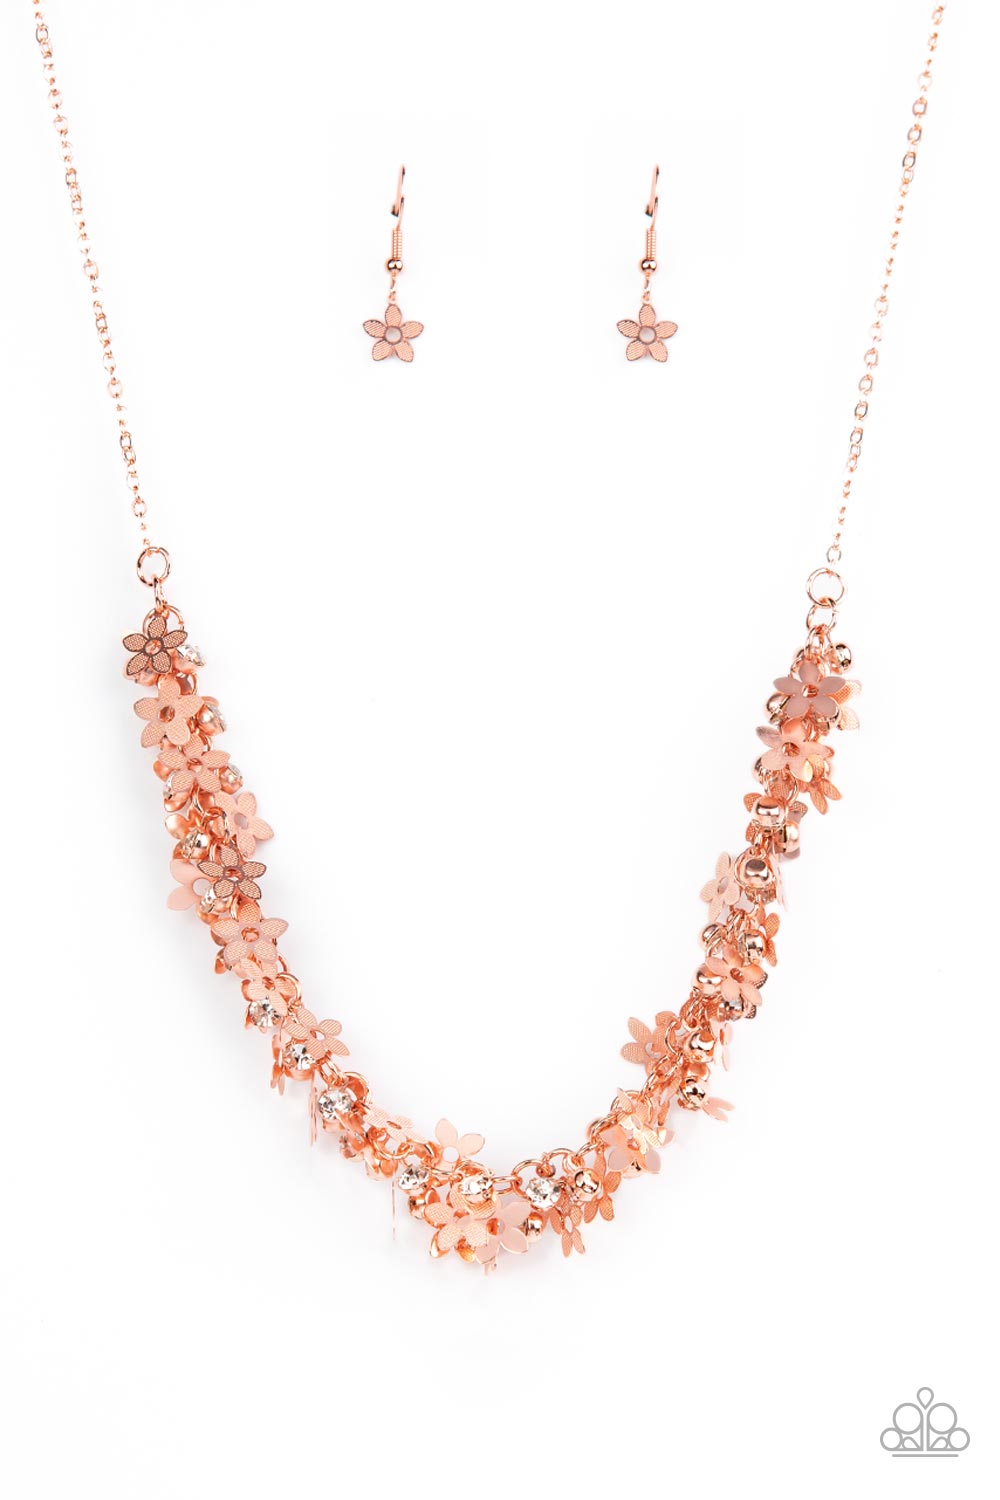 five-dollar-jewelry-fearlessly-floral-copper-necklace-paparazzi-accessories